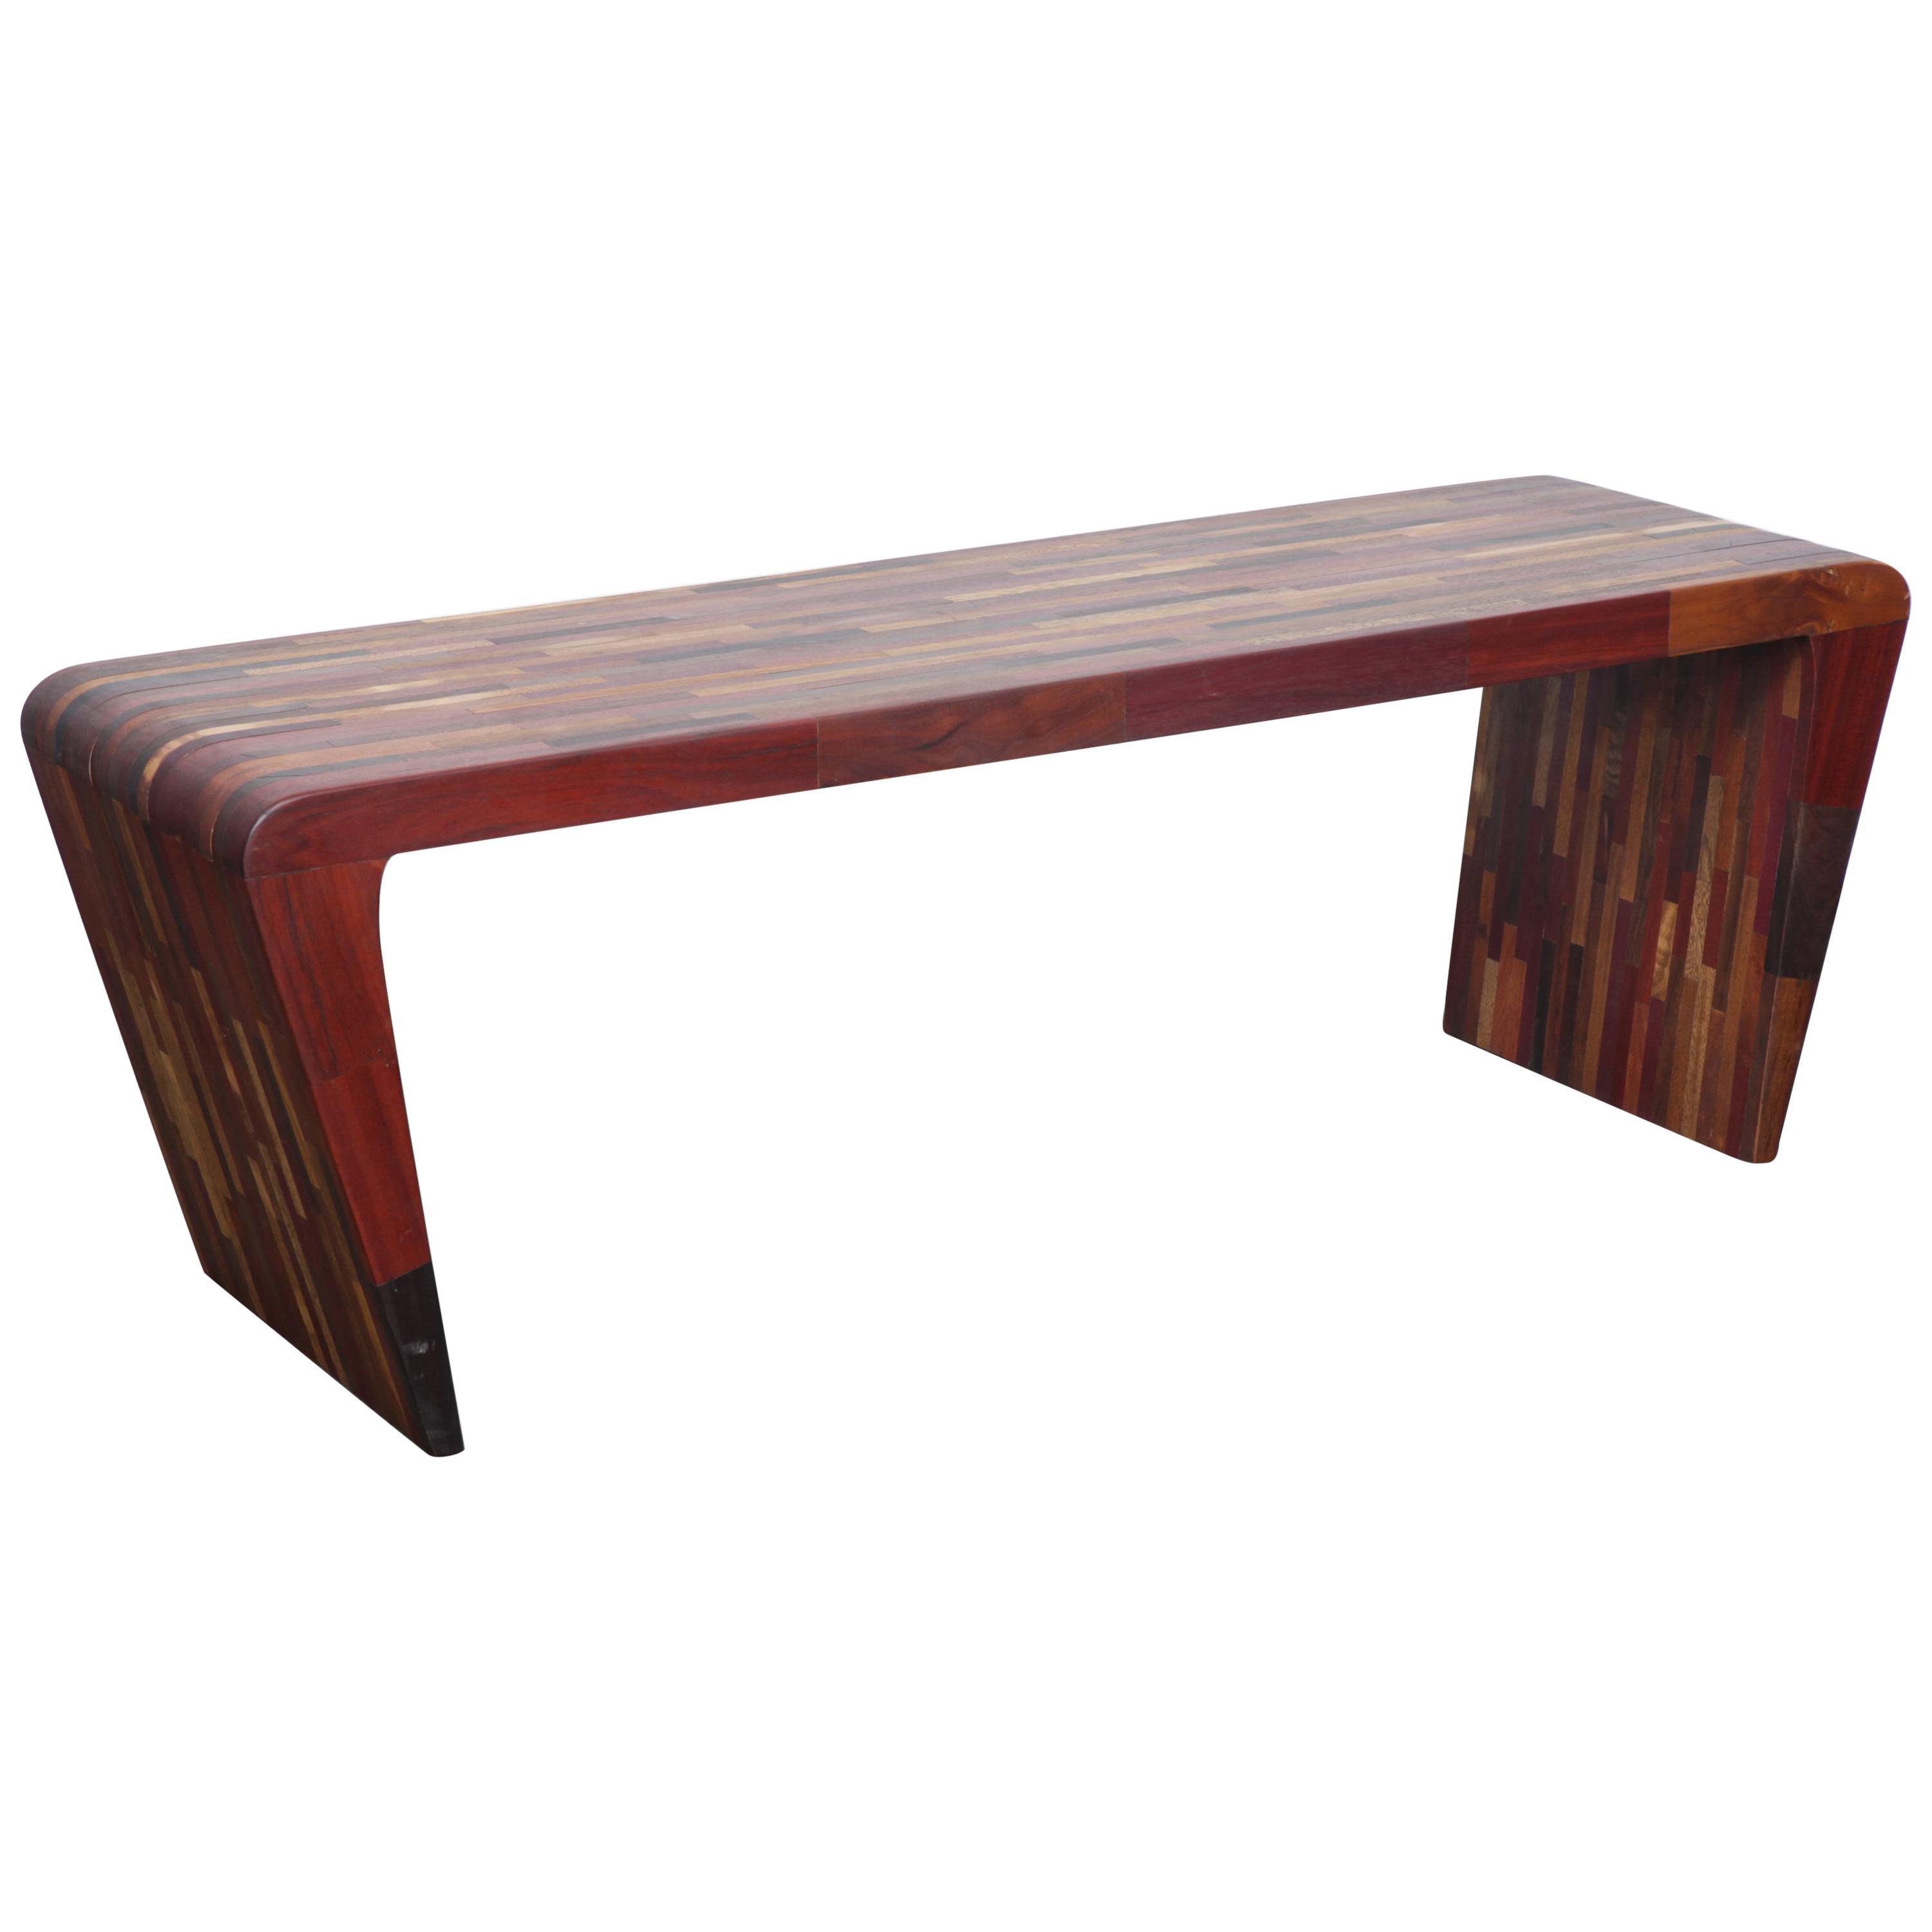 Midcentury Rare Brazilian Solid Wood Console Table by Tunico T